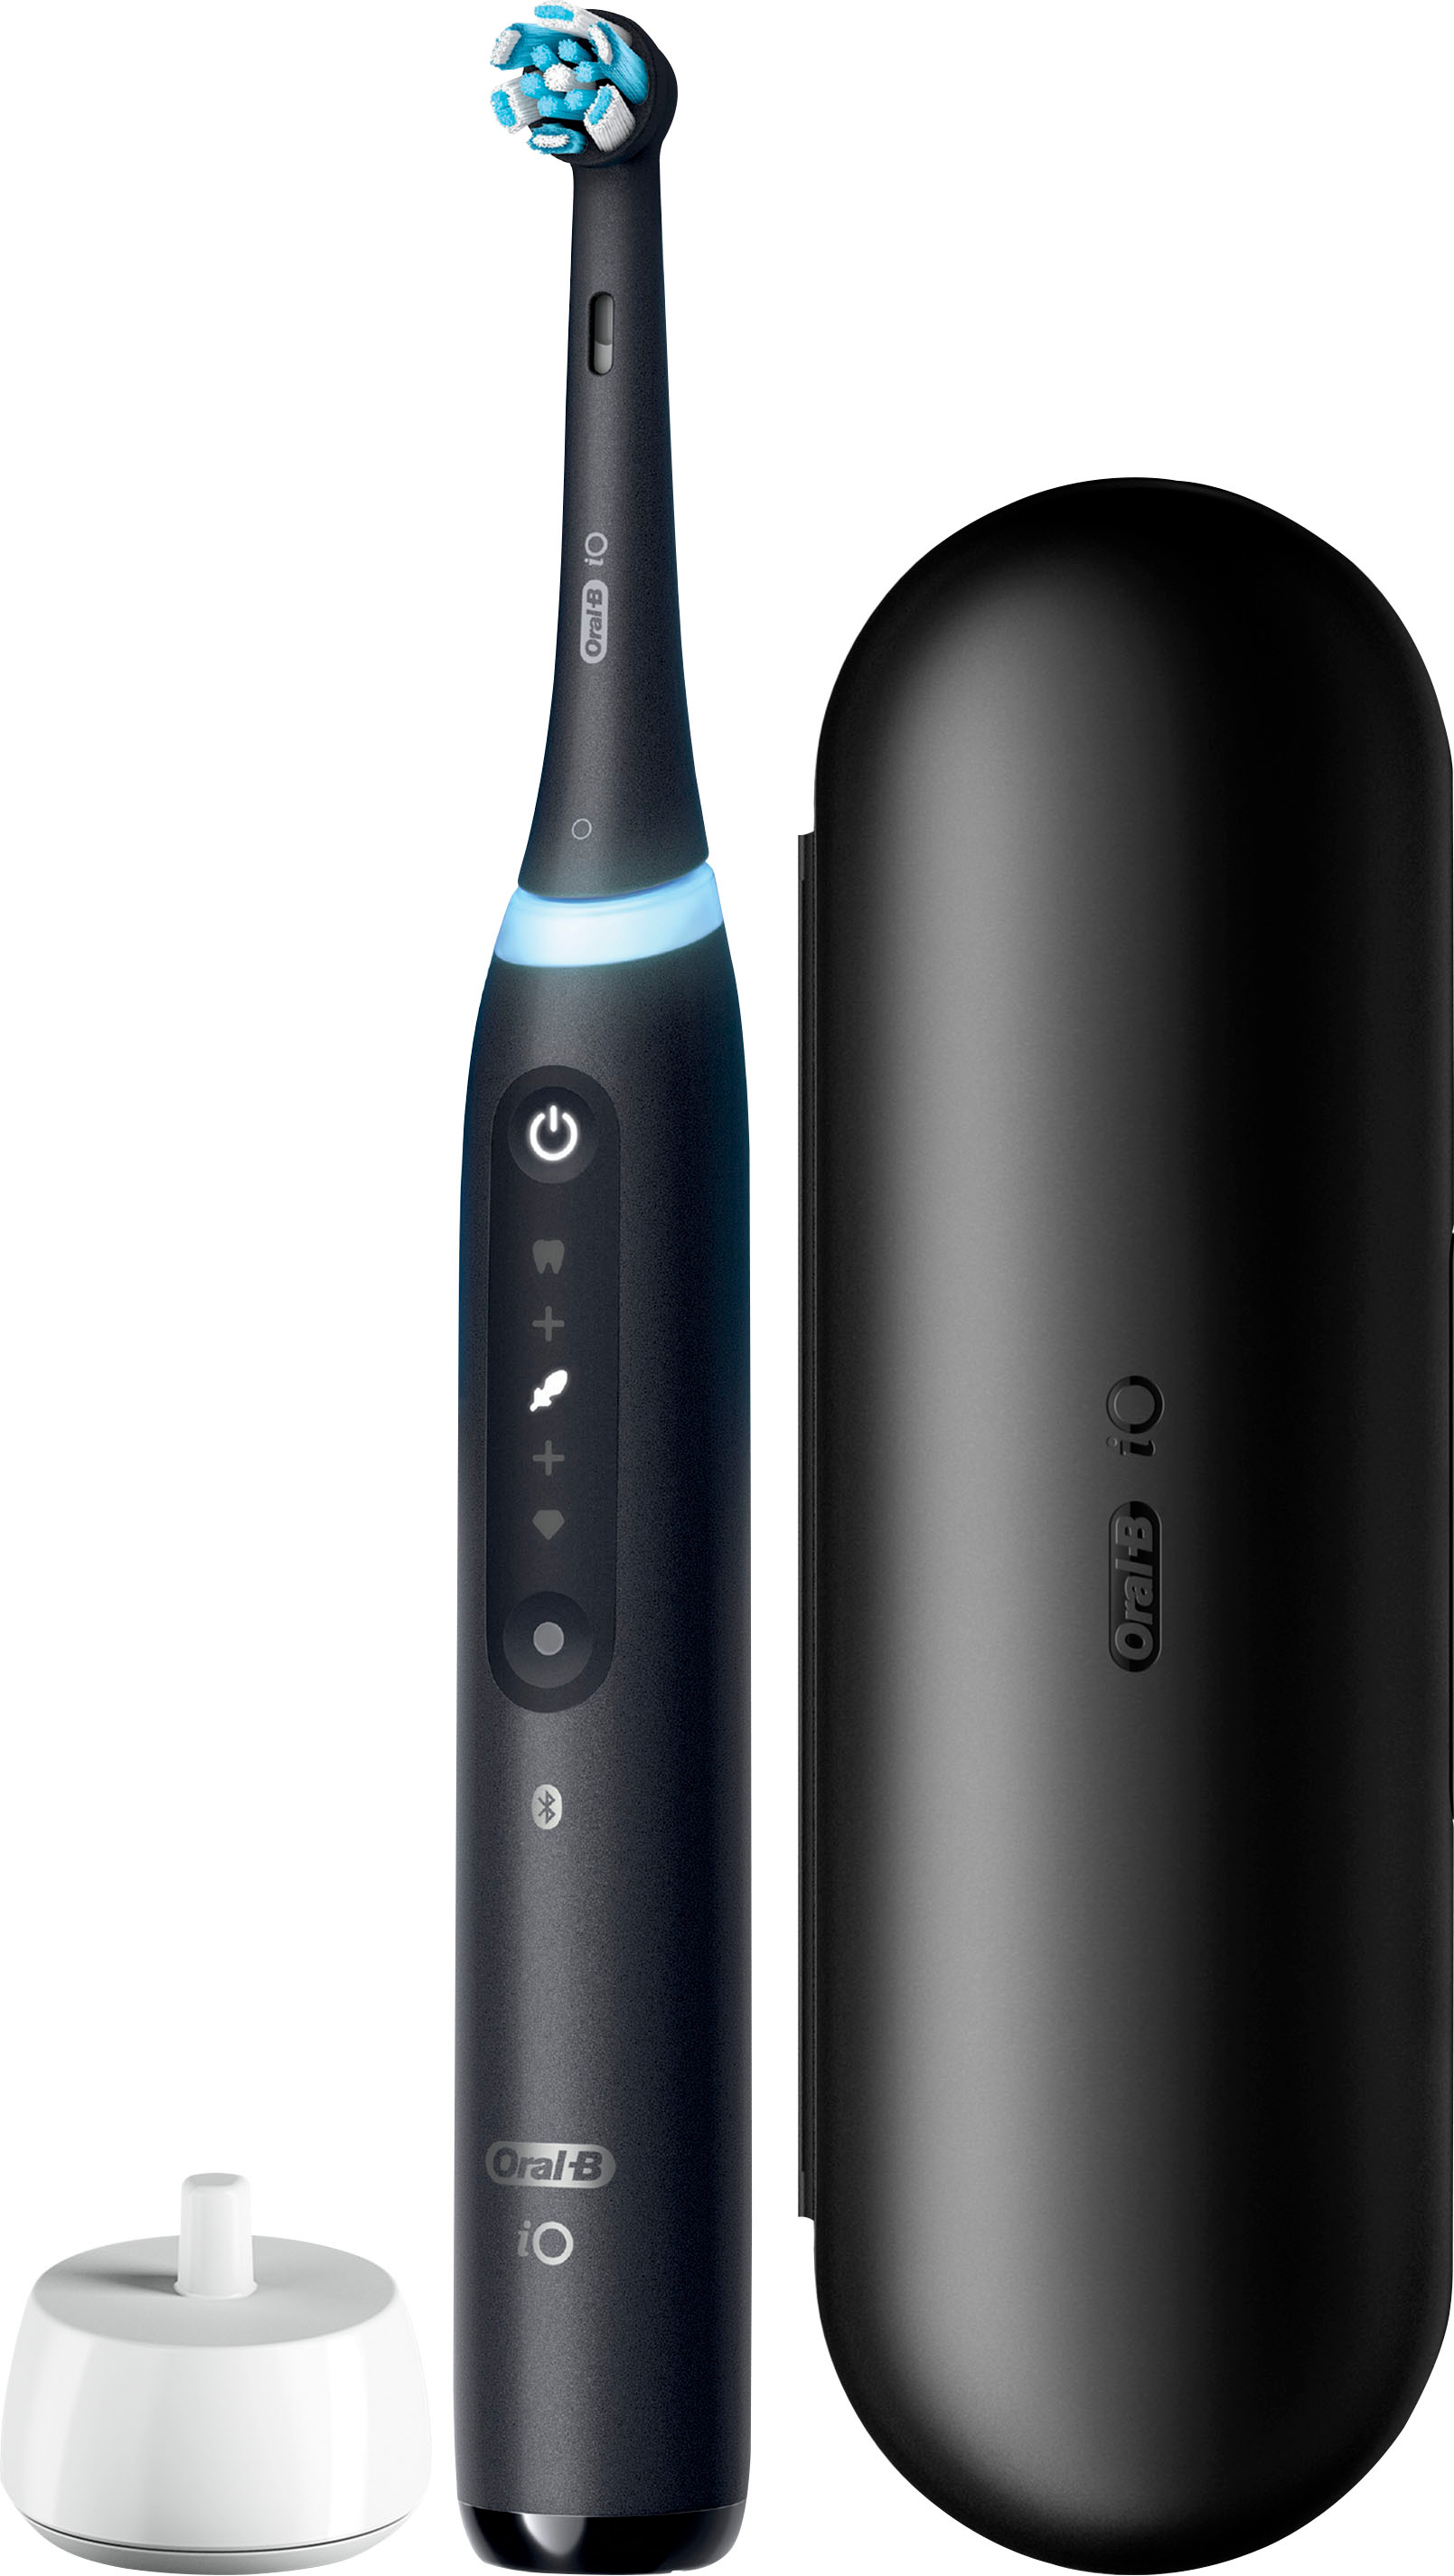 Oral-B - iO Series 5 Rechargeable Electric Toothbrush Black w/Brush Head - Black